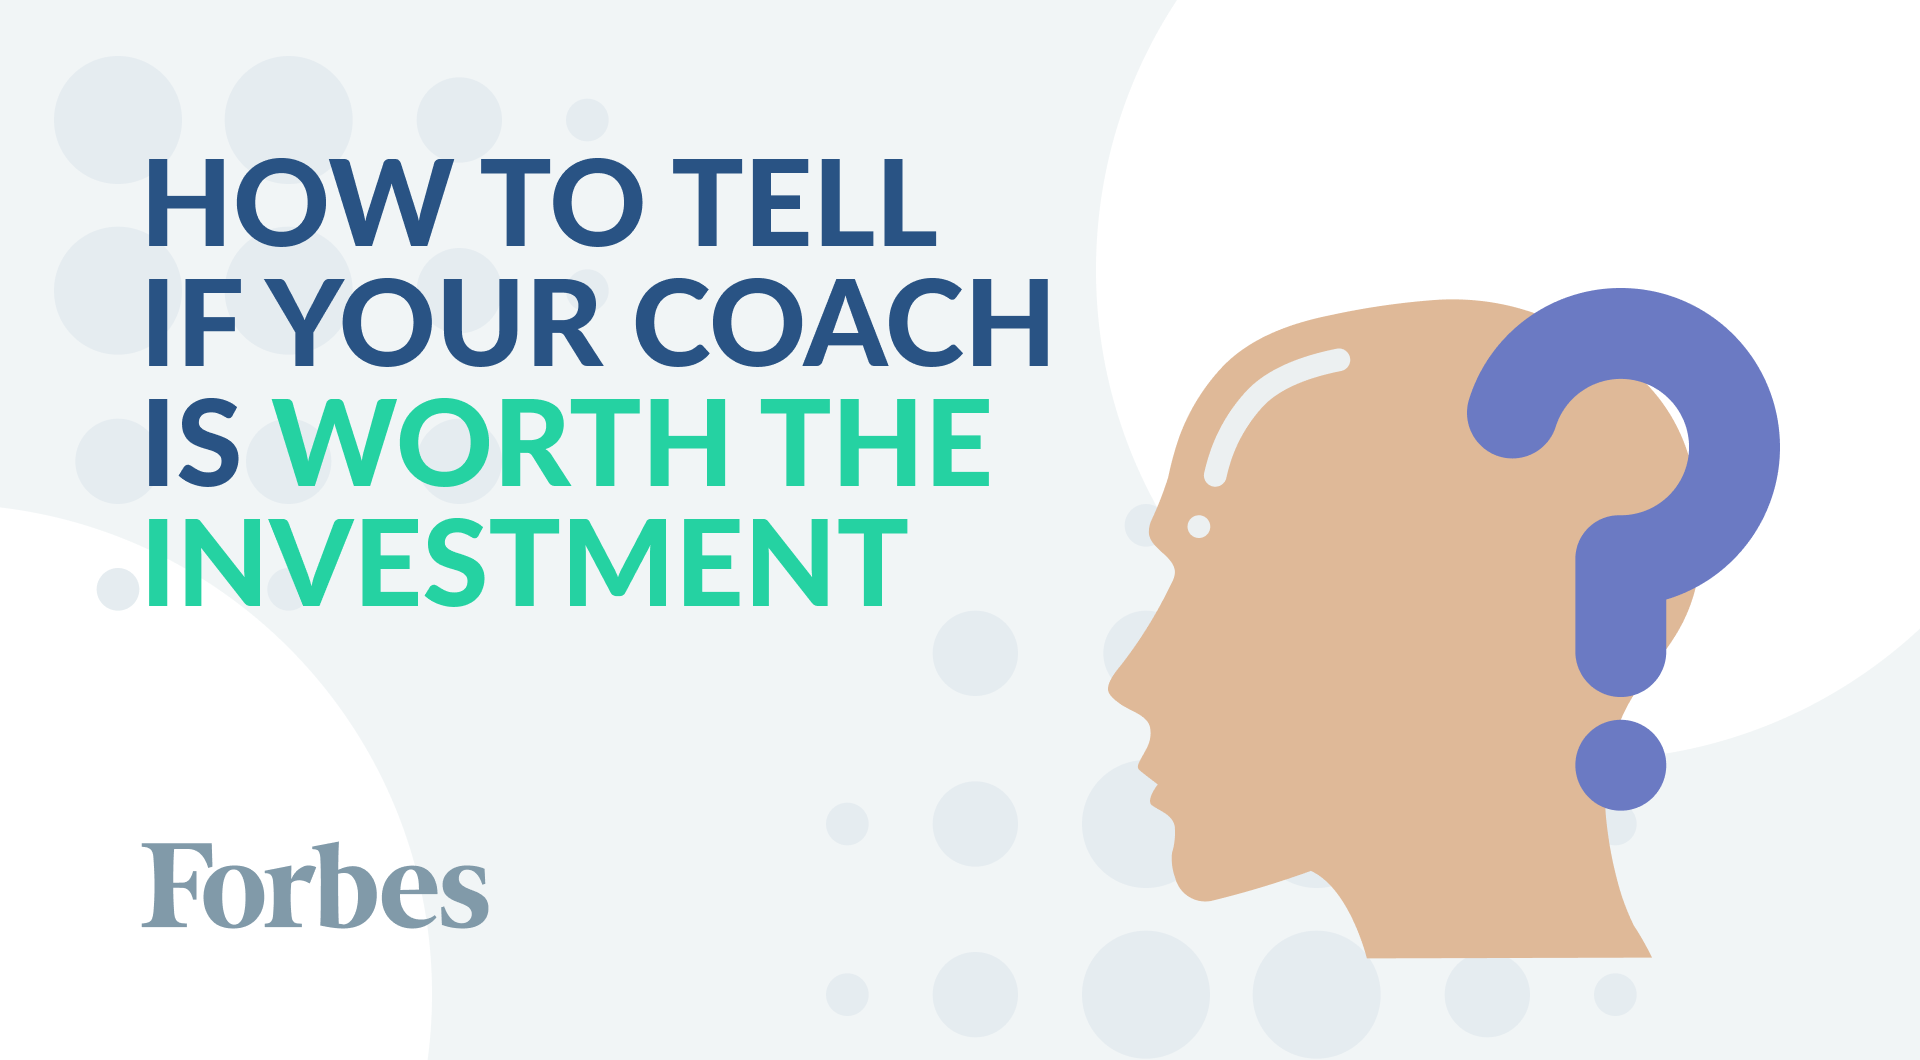 How To Tell If Your Coach Is Worth The Investment